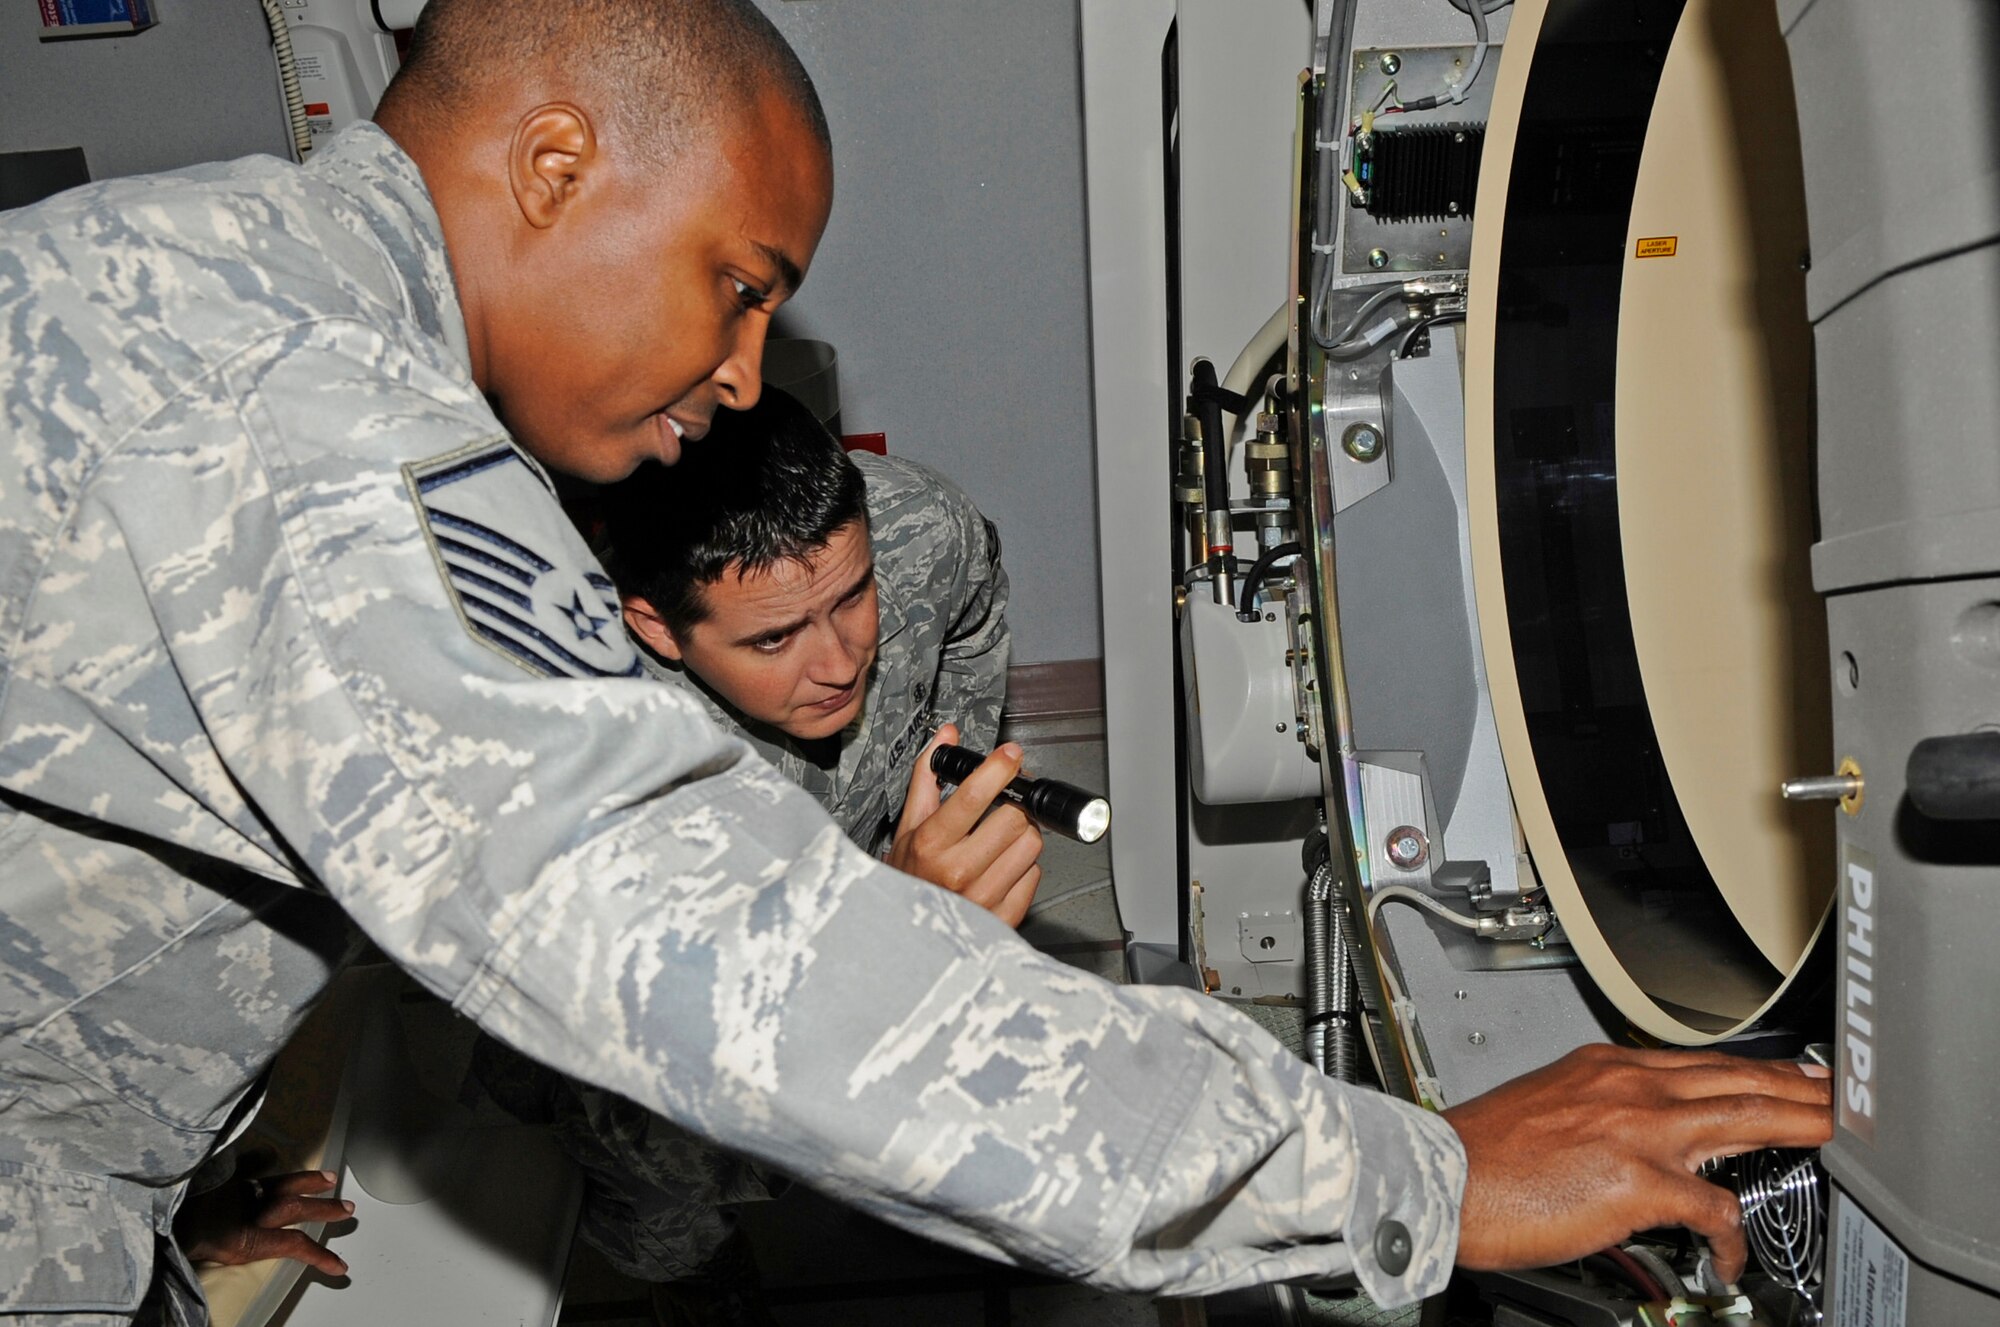 Master Sgt. Mark Person and Staff Sgt. Orlando Ortega, members of the 2nd Medical Group Medical Logistics Flight, inspect the inside of the computerized tomography scanner Aug. 22 as part of a routine inspection at the Medical Clinic on Barksdale Air Force Base, La. The team ensures the machine is inspected at least once every six months. (U.S. Air Force photo/Airman 1st Class Andrea F. Liechti) (RELEASED)